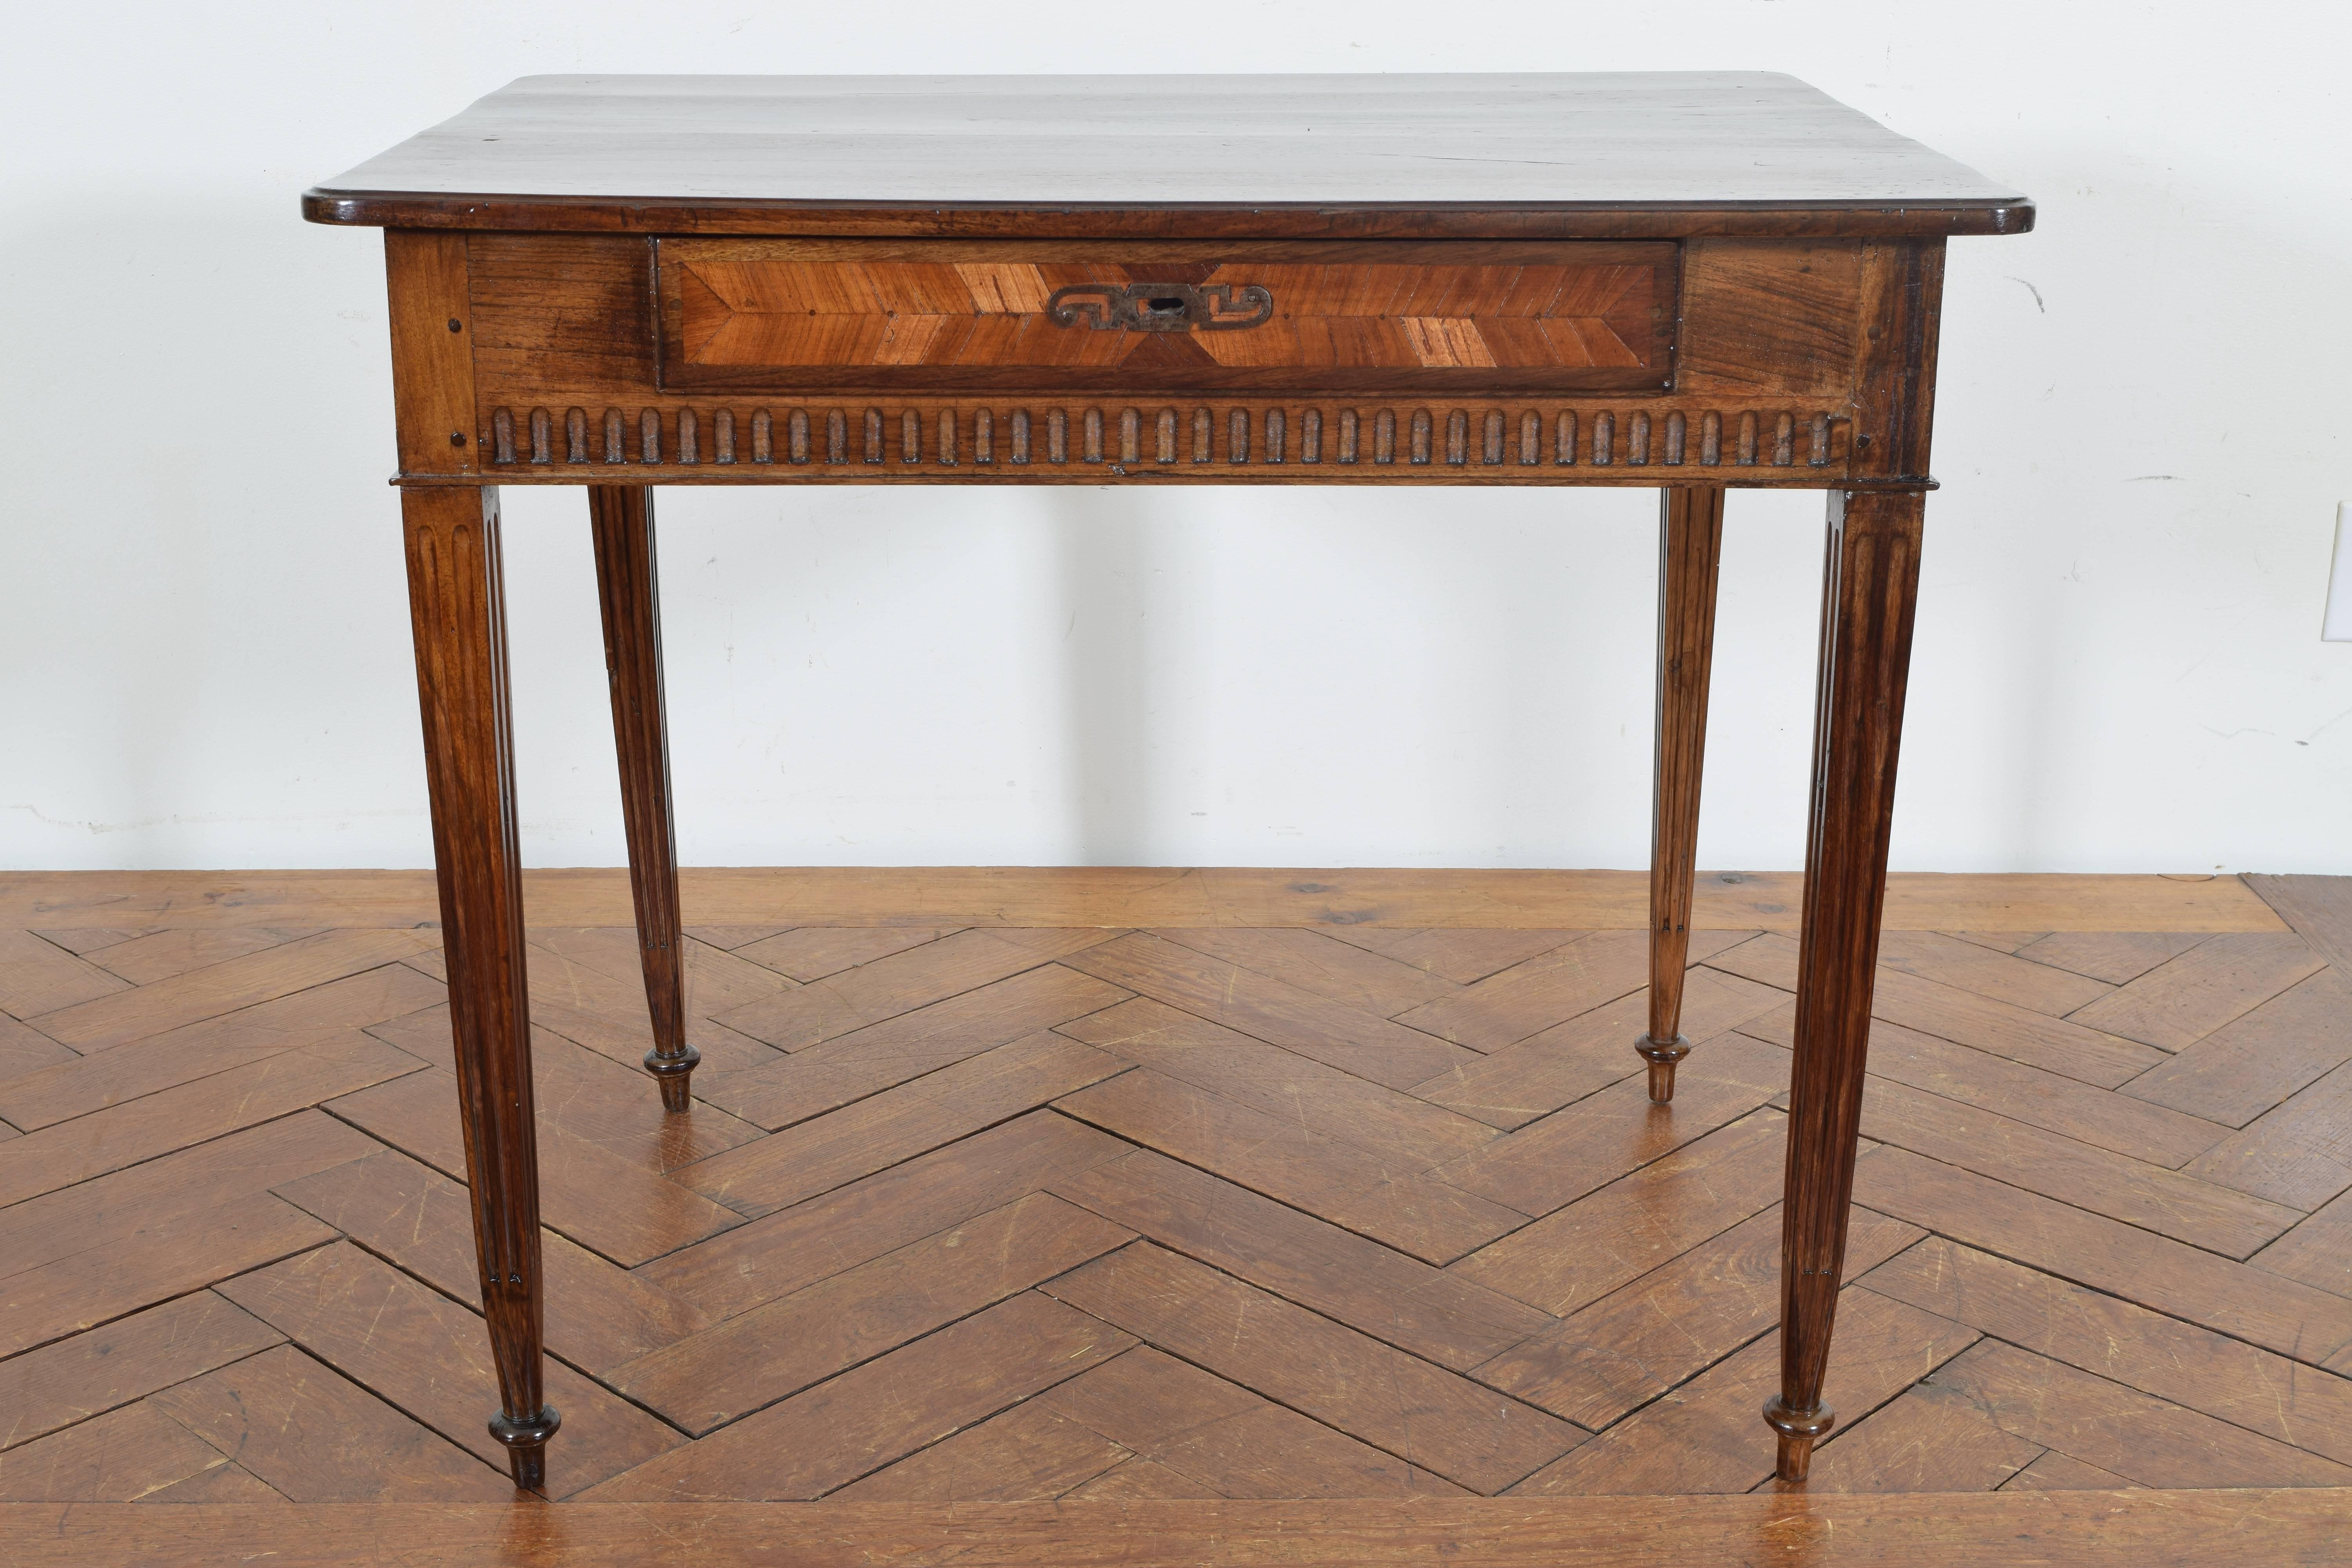 The rectangular top with rounded corners, the conforming case with detail carvings and housing one veneered drawer, raised on fluted tapering legs ending in turned feet.